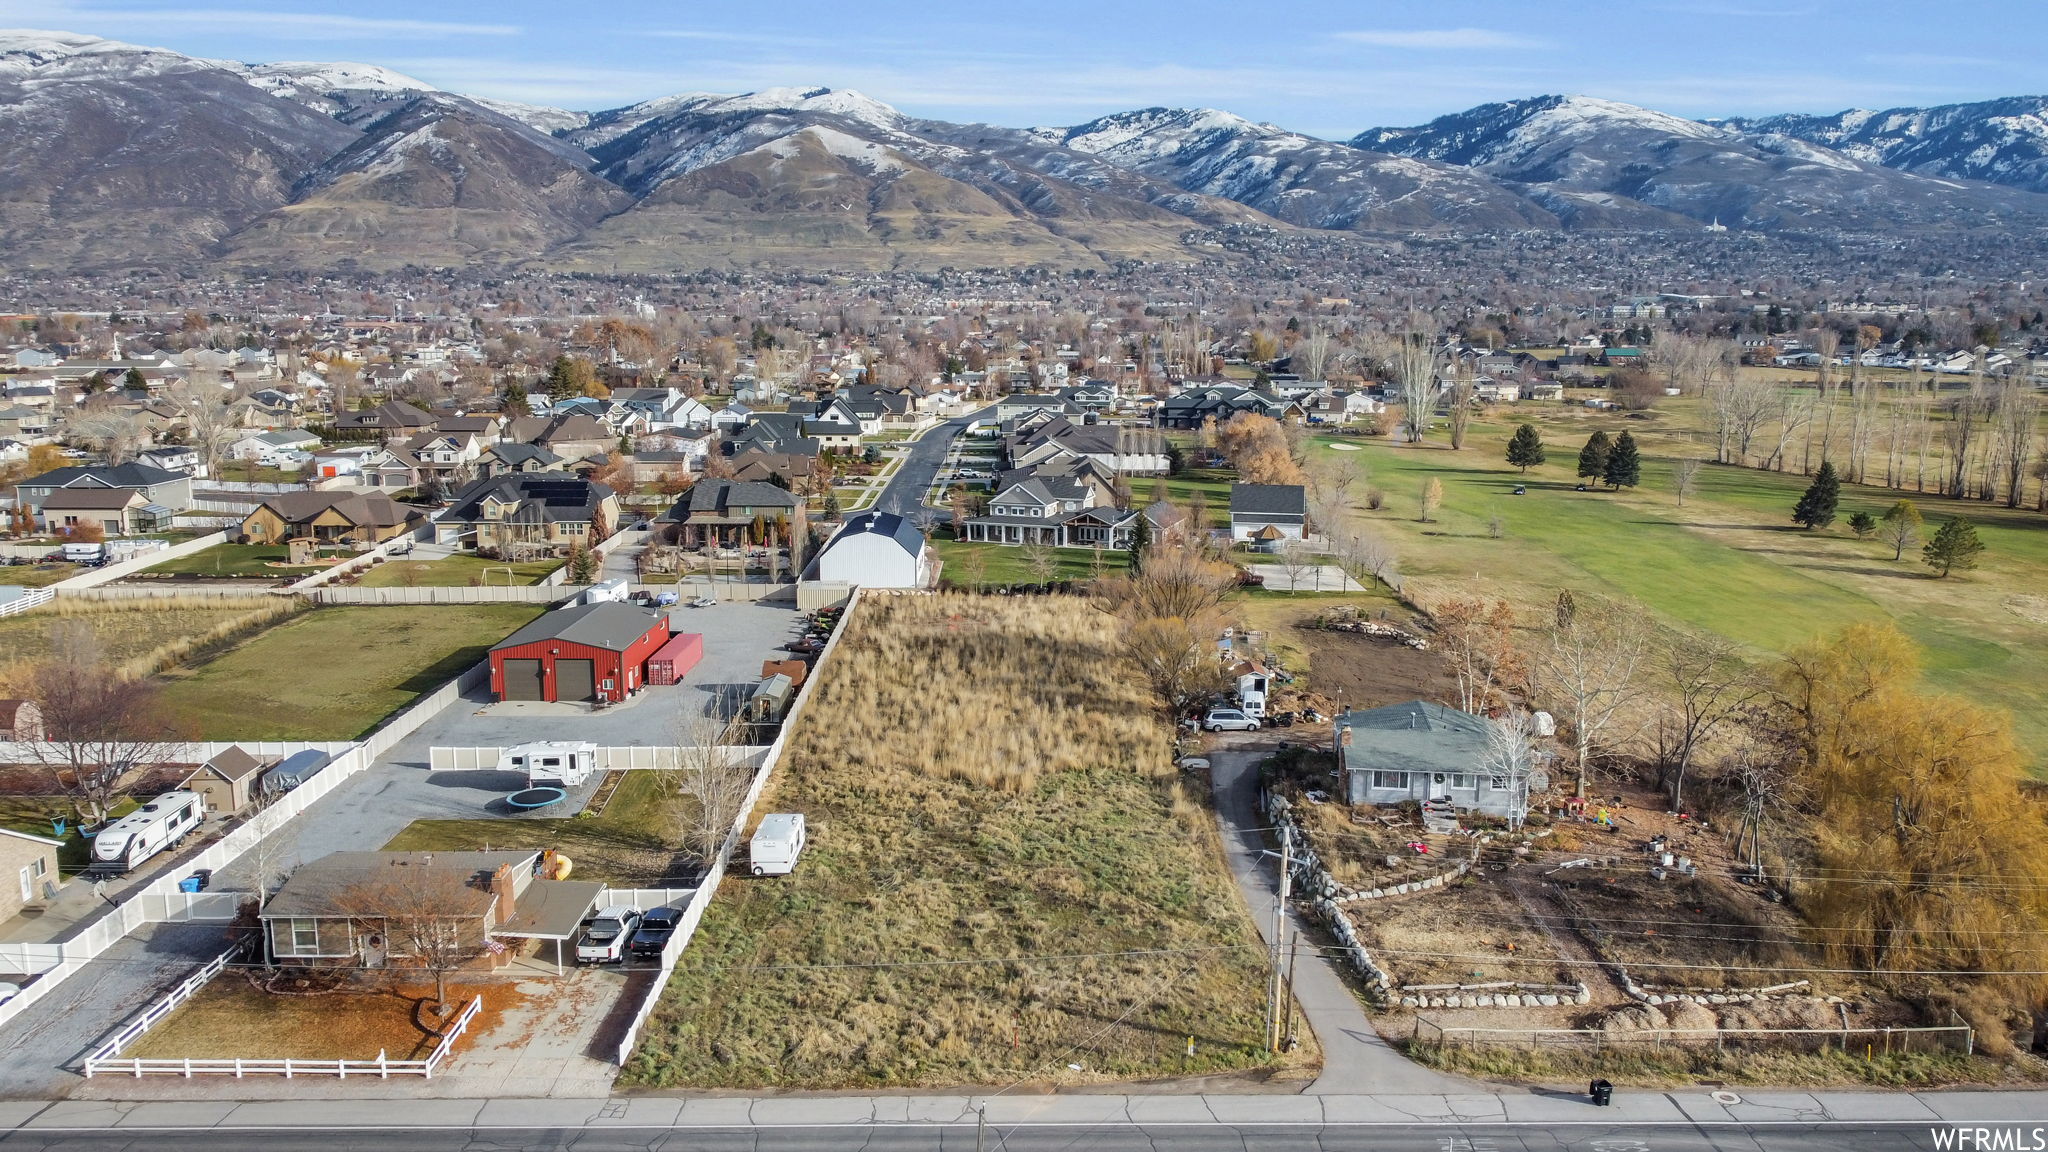 Birds eye view of property featuring a mountain view looking east